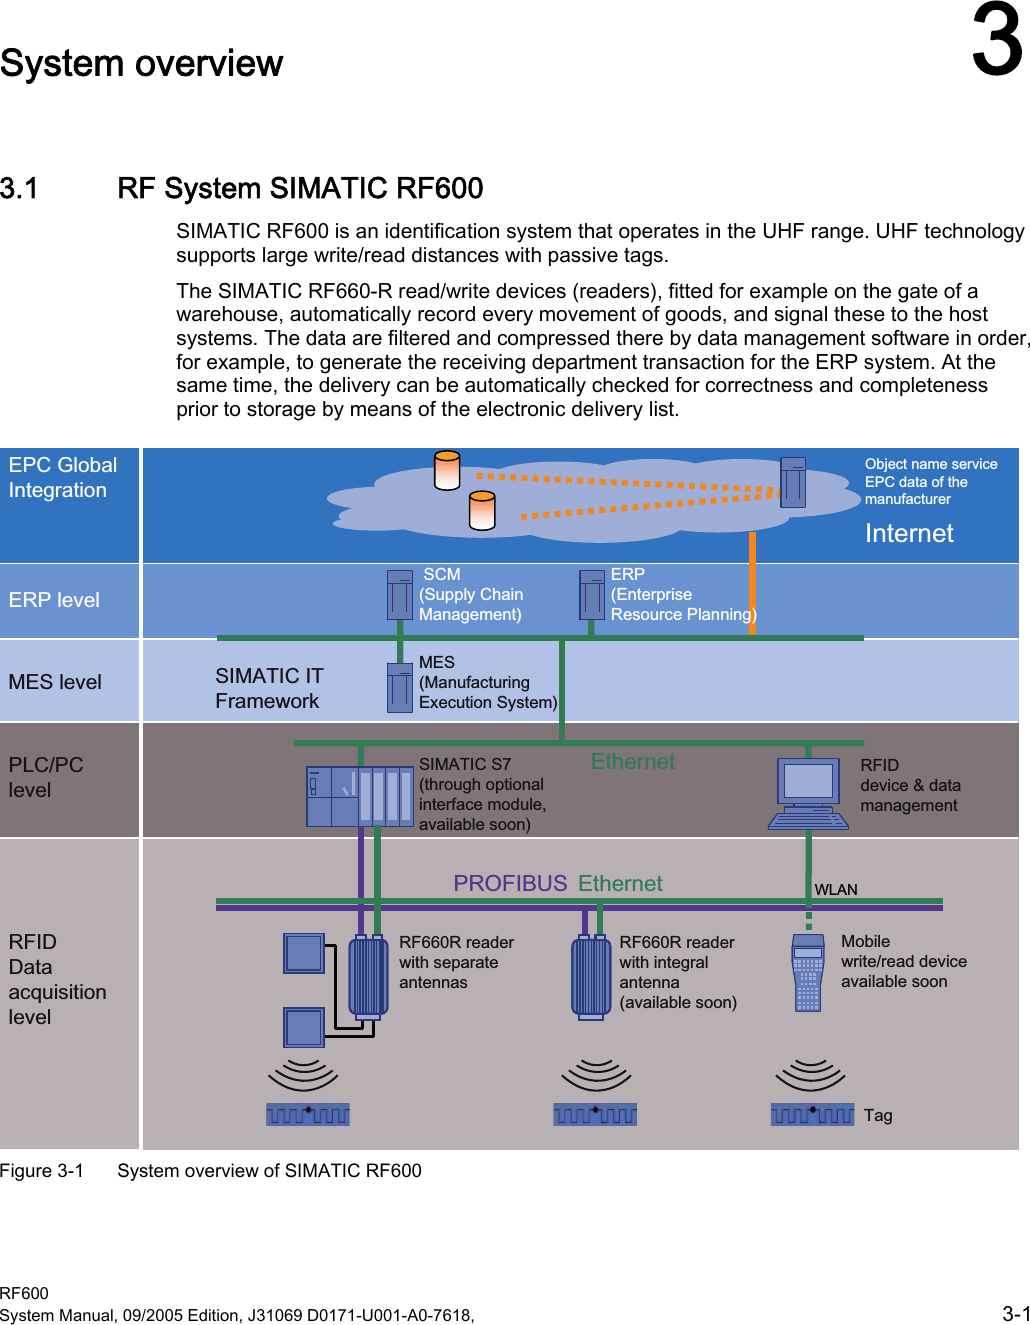  RF600 System Manual, 09/2005 Edition, J31069 D0171-U001-A0-7618,    3-1 System overview  33.1 RF System SIMATIC RF600 SIMATIC RF600 is an identification system that operates in the UHF range. UHF technology supports large write/read distances with passive tags.  The SIMATIC RF660-R read/write devices (readers), fitted for example on the gate of a warehouse, automatically record every movement of goods, and signal these to the host systems. The data are filtered and compressed there by data management software in order, for example, to generate the receiving department transaction for the ERP system. At the same time, the delivery can be automatically checked for correctness and completeness prior to storage by means of the electronic delivery list. ,QWHUQHW:/$1(WKHUQHW352),%86 (WKHUQHW5),&apos;&apos;DWDDFTXLVLWLRQOHYHO(53(QWHUSULVH5HVRXUFH3ODQQLQJb6&amp;0b6XSSO\&amp;KDLQ0DQDJHPHQW0(60DQXIDFWXULQJ([HFXWLRQ6\VWHP6,0$7,&amp;,7)UDPHZRUN5)5UHDGHUZLWKVHSDUDWHDQWHQQDV5)5UHDGHUZLWKLQWHJUDODQWHQQDDYDLODEOHVRRQ0RELOHZULWHUHDGGHYLFHDYDLODEOHVRRQ7DJ6,0$7,&amp;6WKURXJKRSWLRQDOLQWHUIDFHPRGXOHDYDLODEOHVRRQ5),&apos;GHYLFHGDWDPDQDJHPHQW2EMHFWQDPHVHUYLFH(3&amp;GDWDRIWKHPDQXIDFWXUHU(3&amp;*OREDO,QWHJUDWLRQ(53OHYHO0(6OHYHO3/&amp;3&amp;OHYHO Figure 3-1  System overview of SIMATIC RF600 